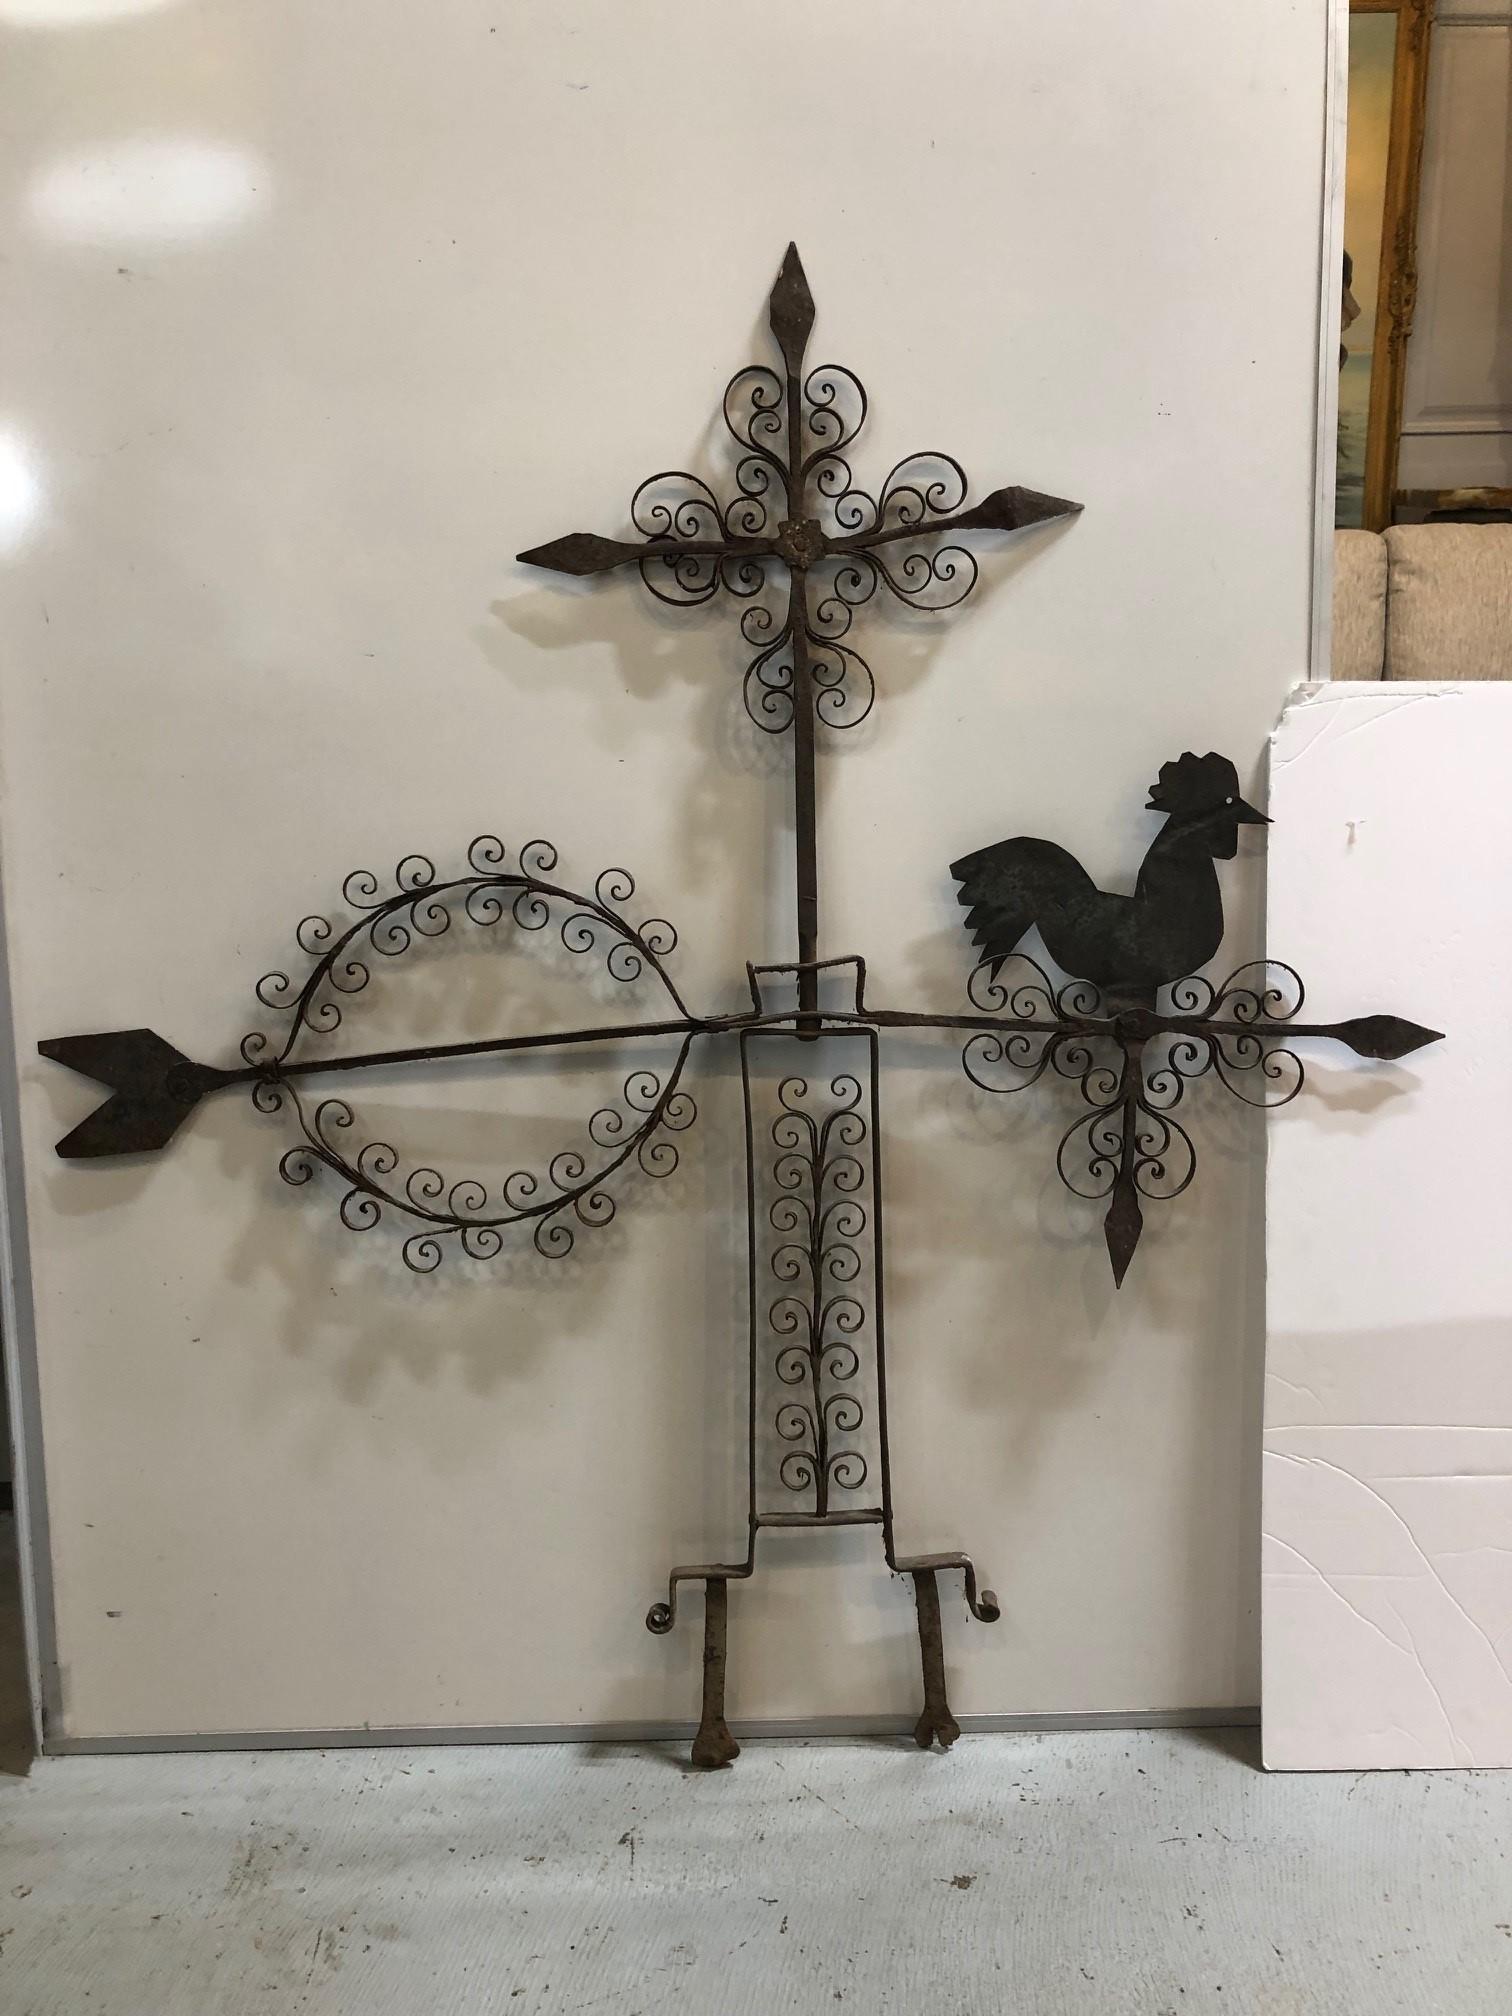 Large Folk Art wrought iron rooster weathervane in good condition for its age ca 1940s . This weathervane is a good size which would look great in a garden or any backyard. Its a fun piece of Folk Art most likely from Mexico it has a nice look.